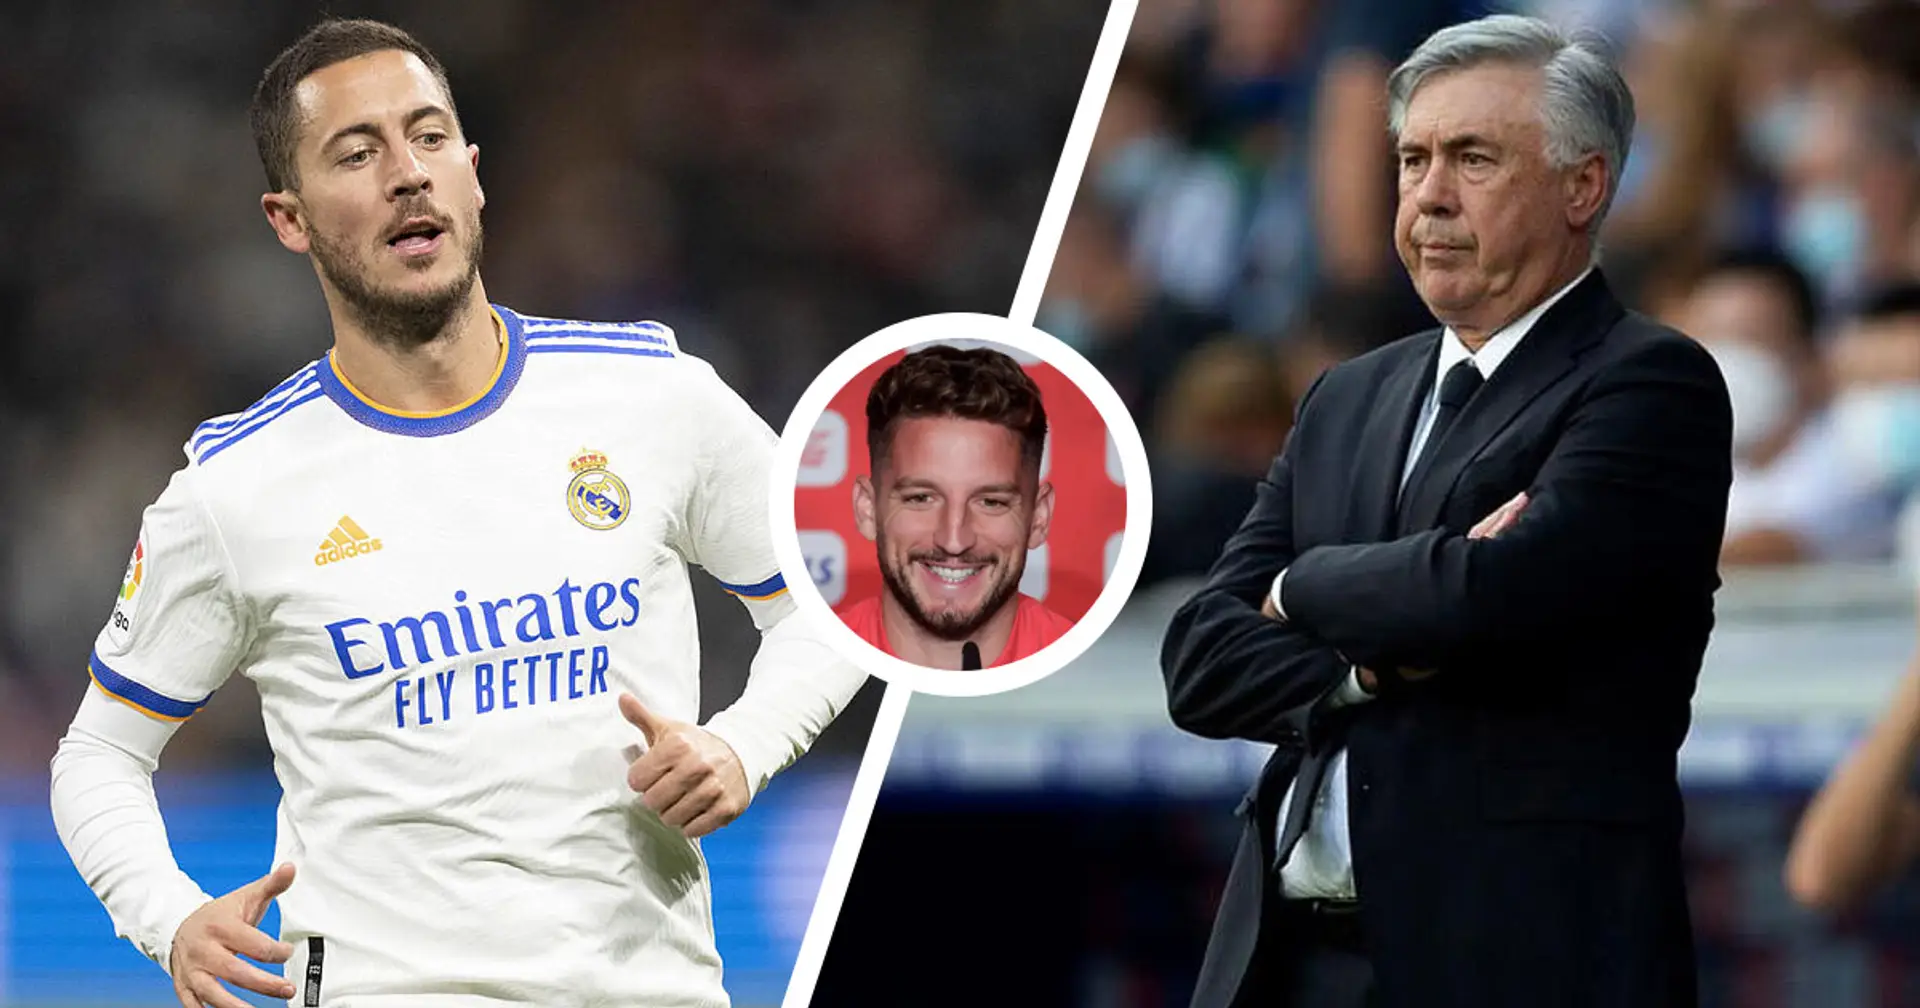 'I think I should call Ancelotti, what's happening with Hazard is not fair': Eden's teammate Mertens